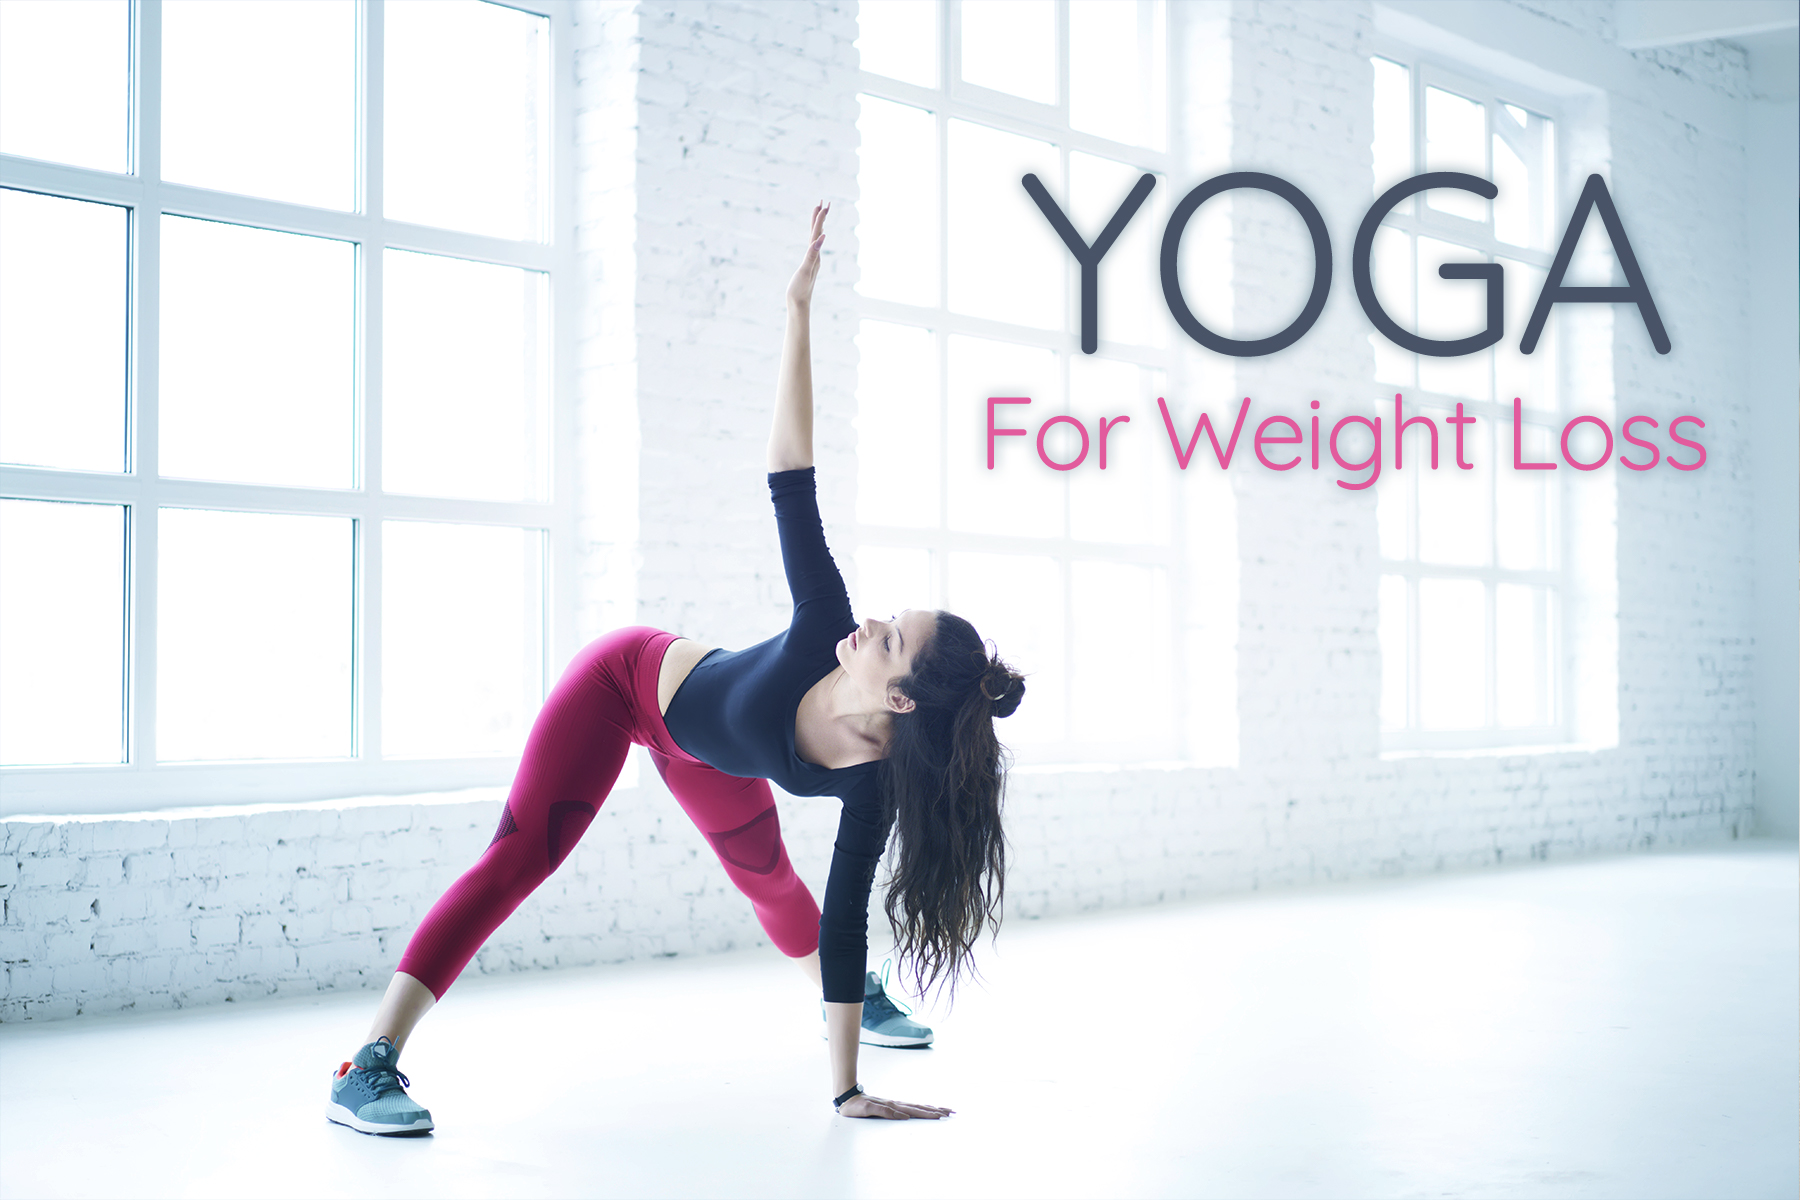 Yoga For Weight Loss image